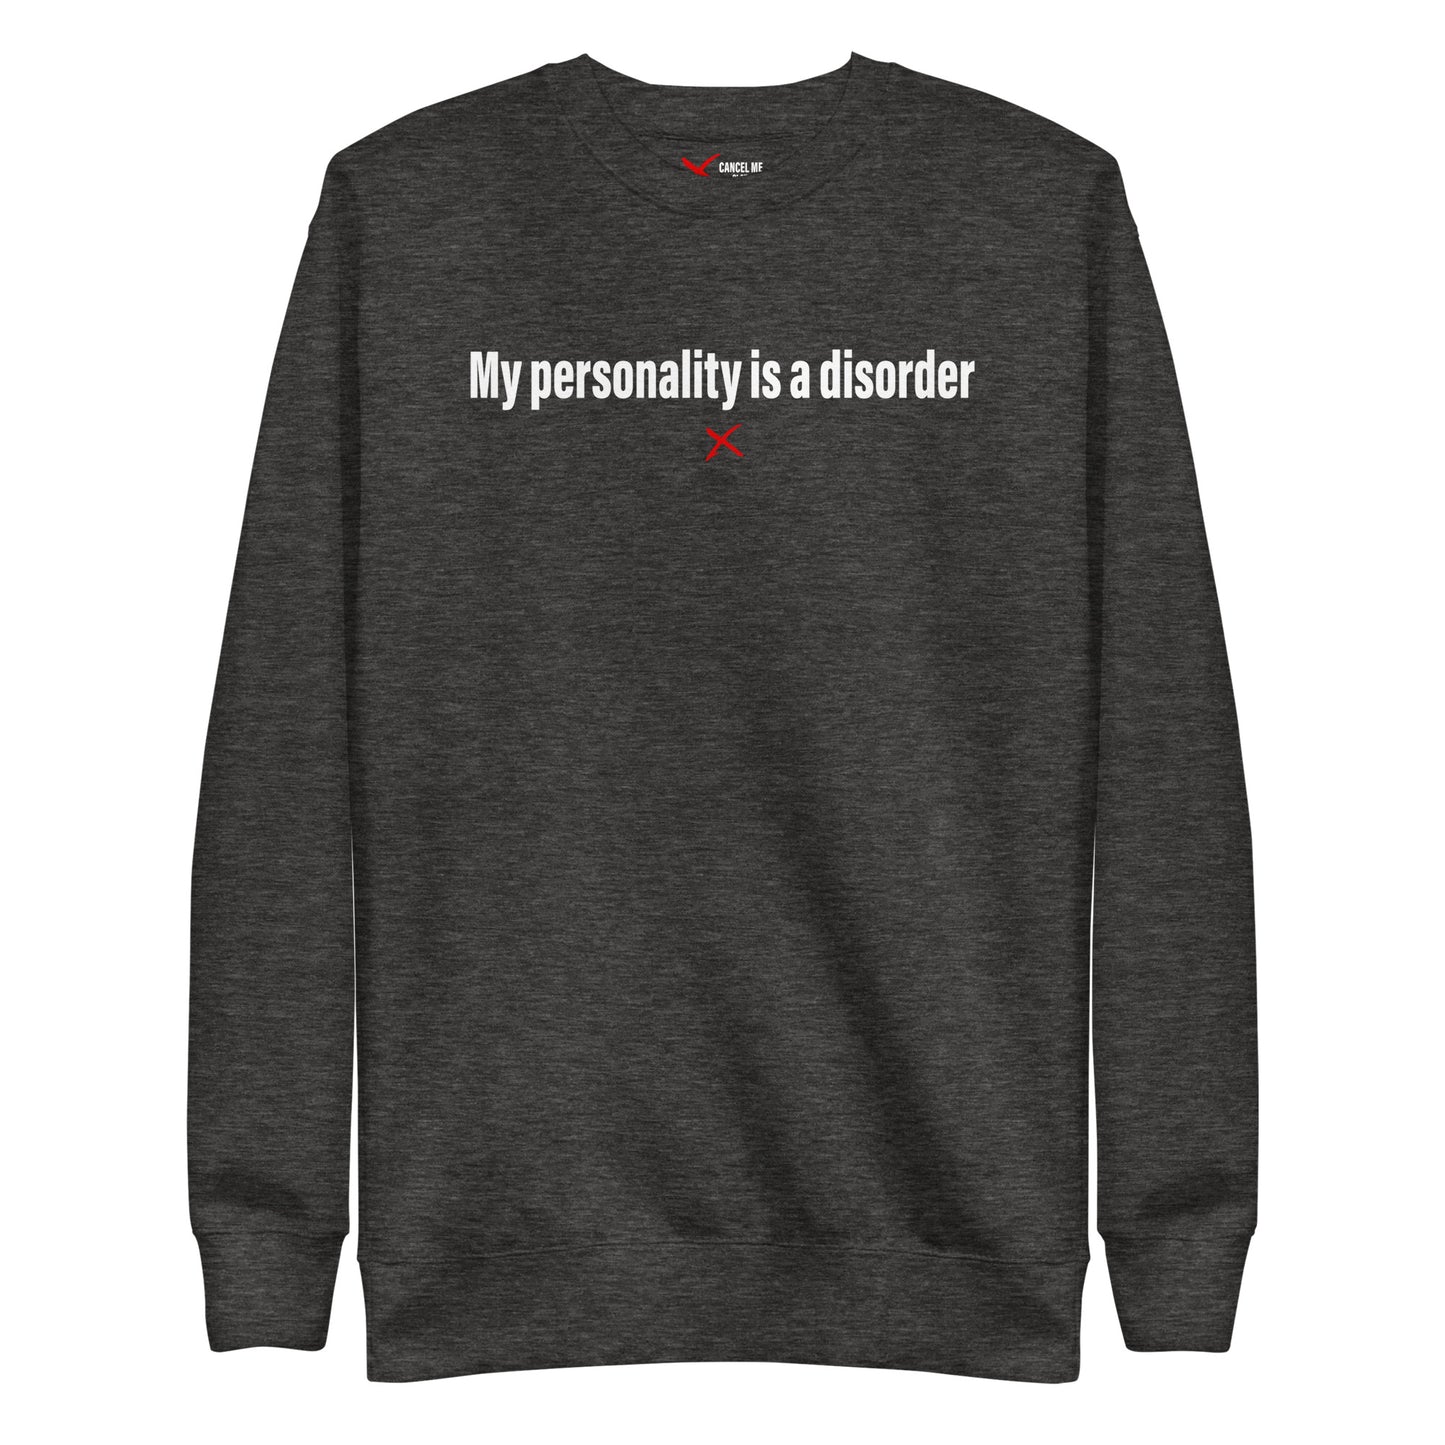 My personality is a disorder - Sweatshirt